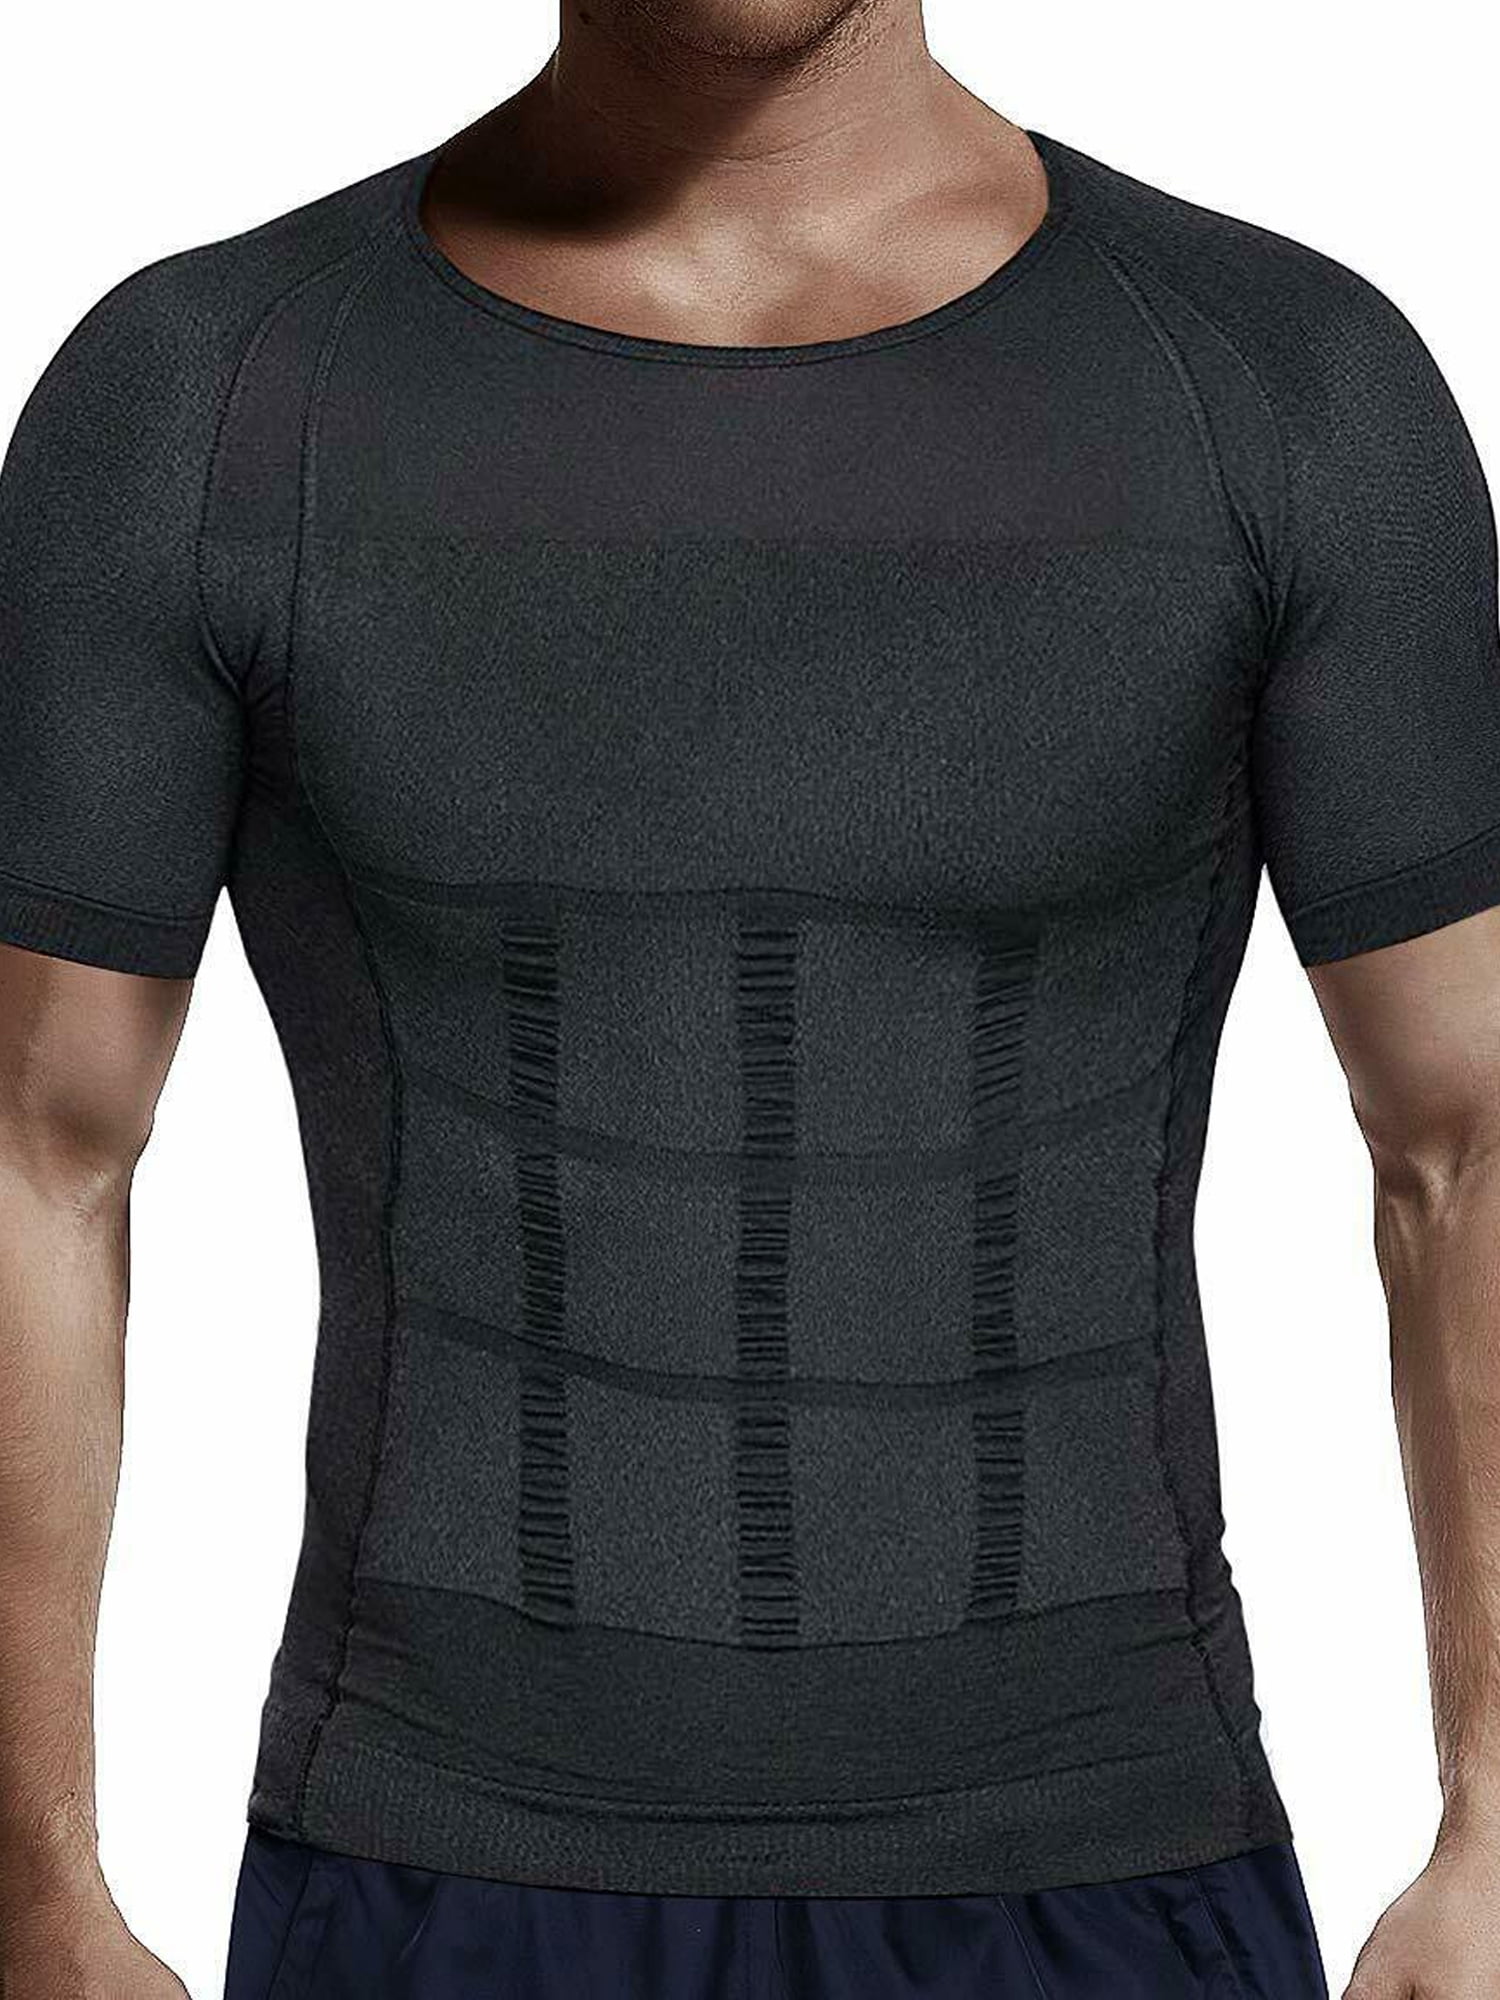 FITVALEN Compression Shirt for Men Gynecomastia Shapewear Vest Undershirt Slimming Body Shaper to Hide Moobs Belly Tummy Control Underwear Gridle Belt Work Out Tank Tops 